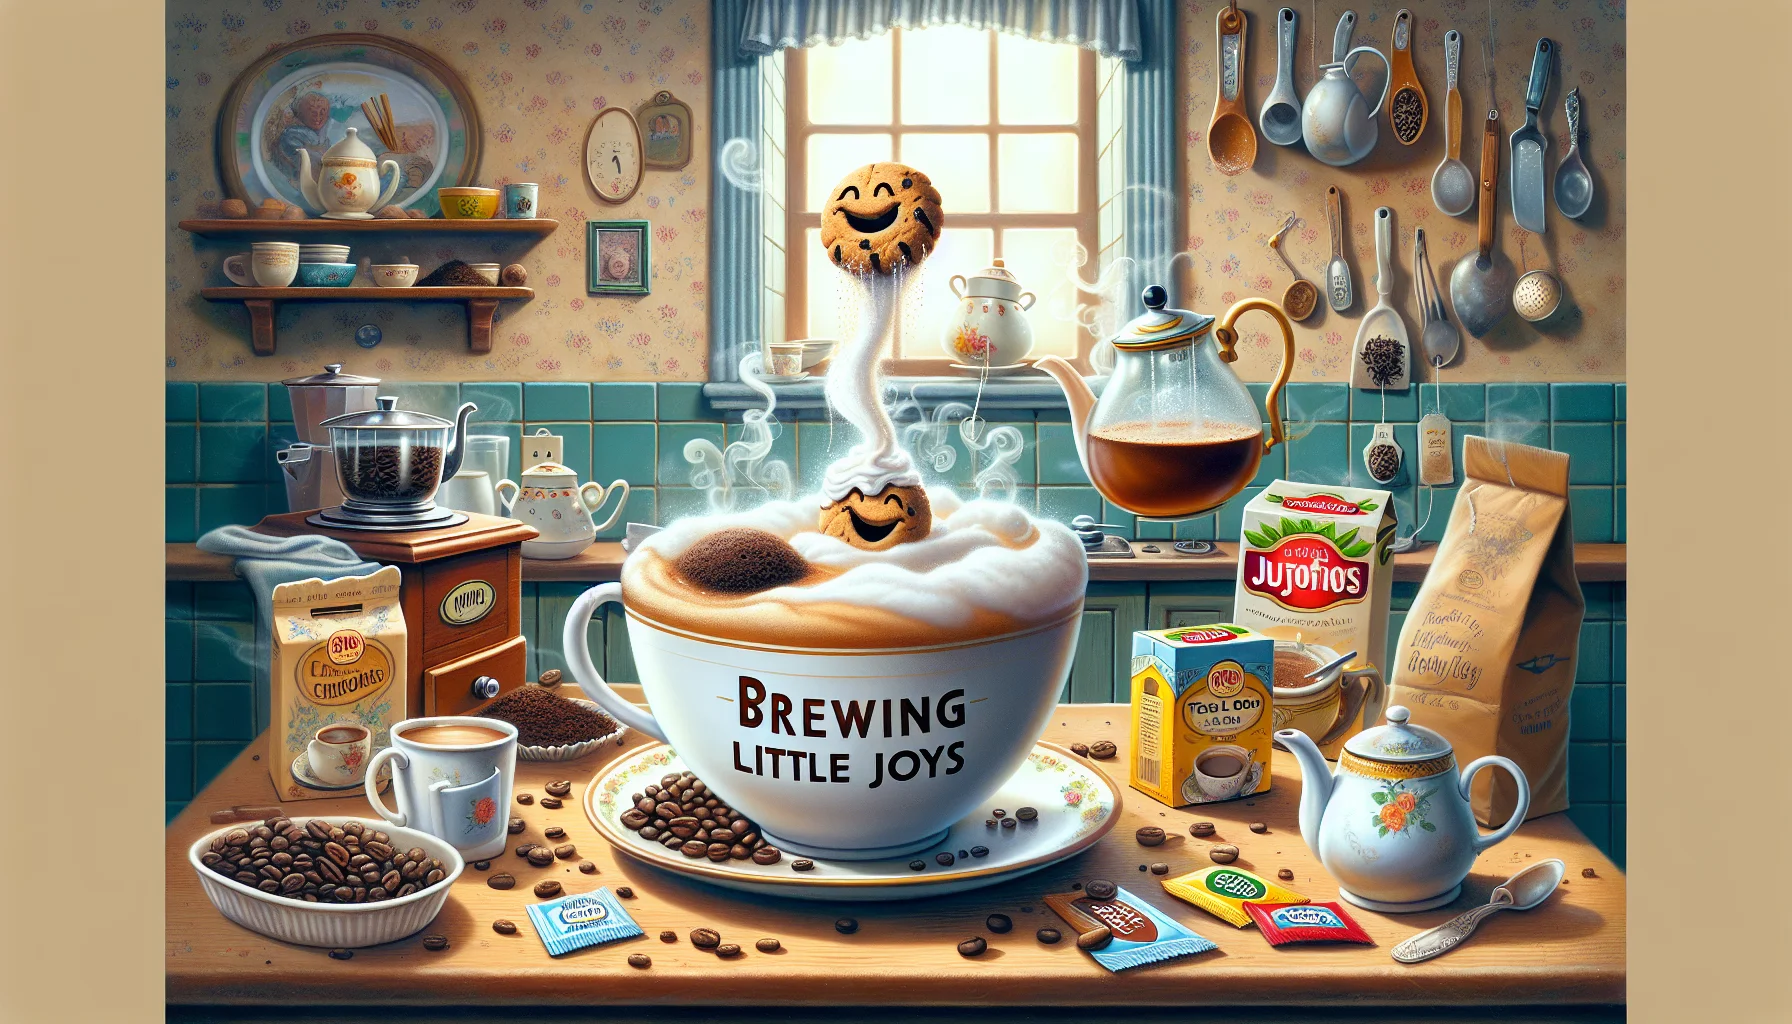 Visualize a light-hearted and humorous situation in which a steaming cup of coffee and a teapot full of fragrant tea are the central characters. They are in a cozy vintage kitchen bustling with 'Brewing Little Joys'. The coffee cup, brimming with frothy cappuccino and a little cookie floating like a raft, emits a chuckle-inducing aroma that swirls around. The tea pot, full of aromatic Earl Grey tea, has several tea bags hanging like playful vines, adding to the fun. The scene is alive with various coffee beans, tea leaves, packets of creamer and boxes of tea bags arranged haphazardly, contributing to the friendly chaos of the enjoyable brewing process.